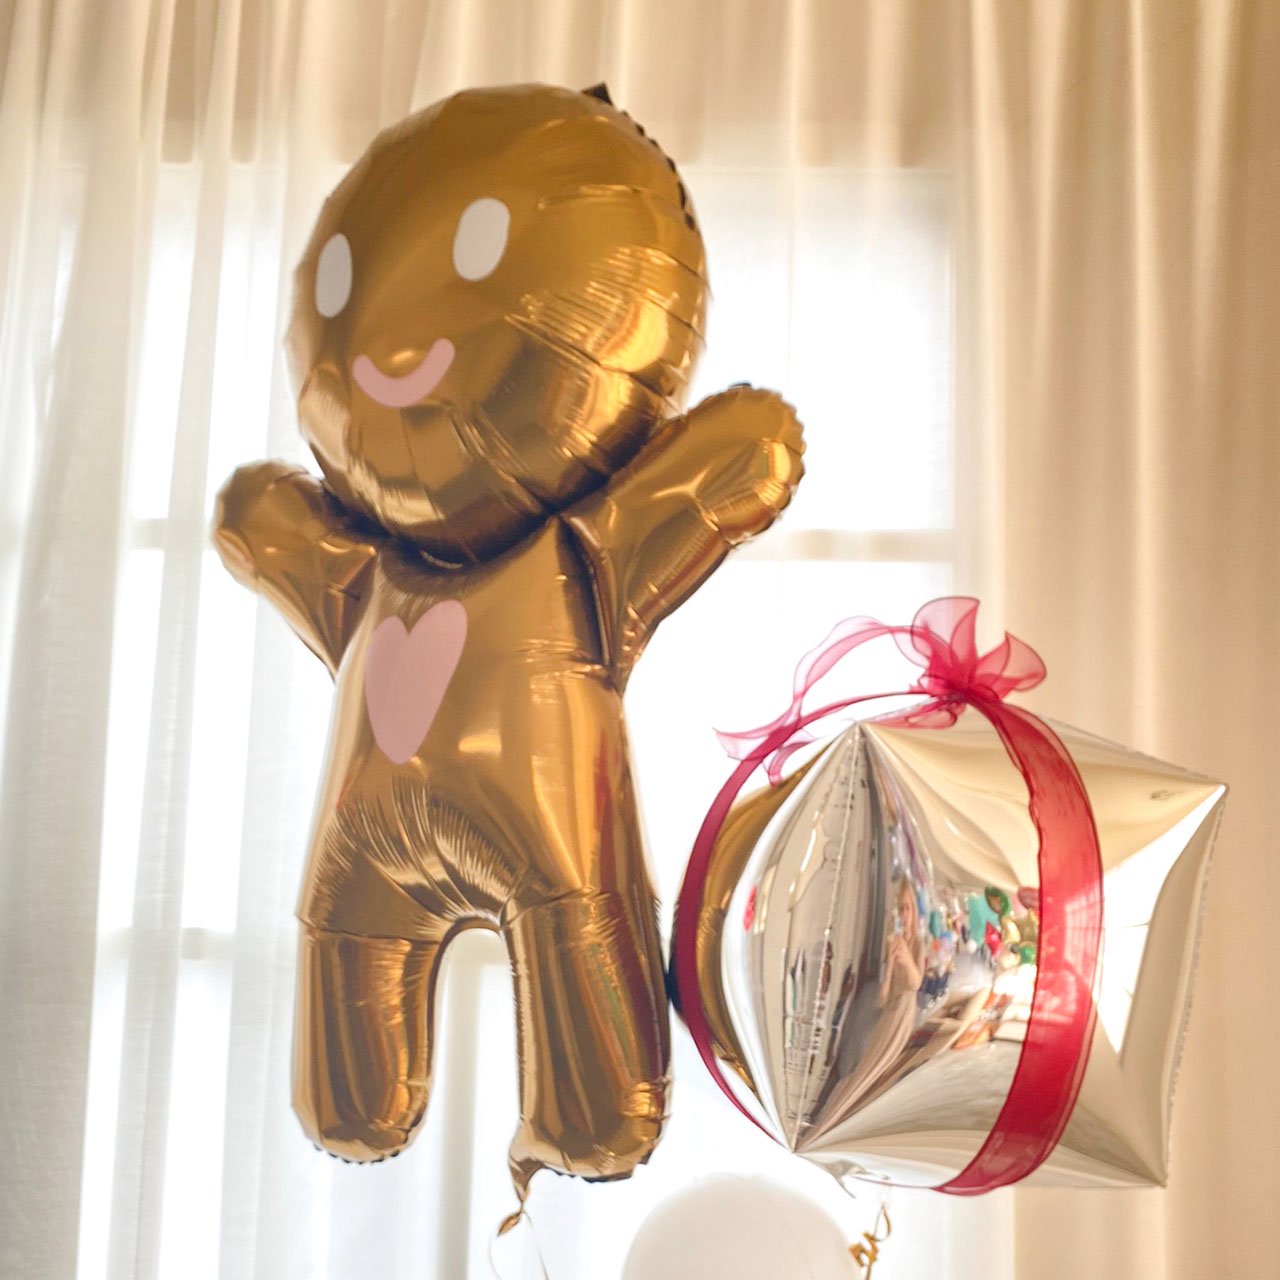 <img class='new_mark_img1' src='https://img.shop-pro.jp/img/new/icons23.gif' style='border:none;display:inline;margin:0px;padding:0px;width:auto;' />Ginger Cookie Float Balloon - Float type - クリスマスジンジャークッキーバルーンヘリウムバルーンギフト